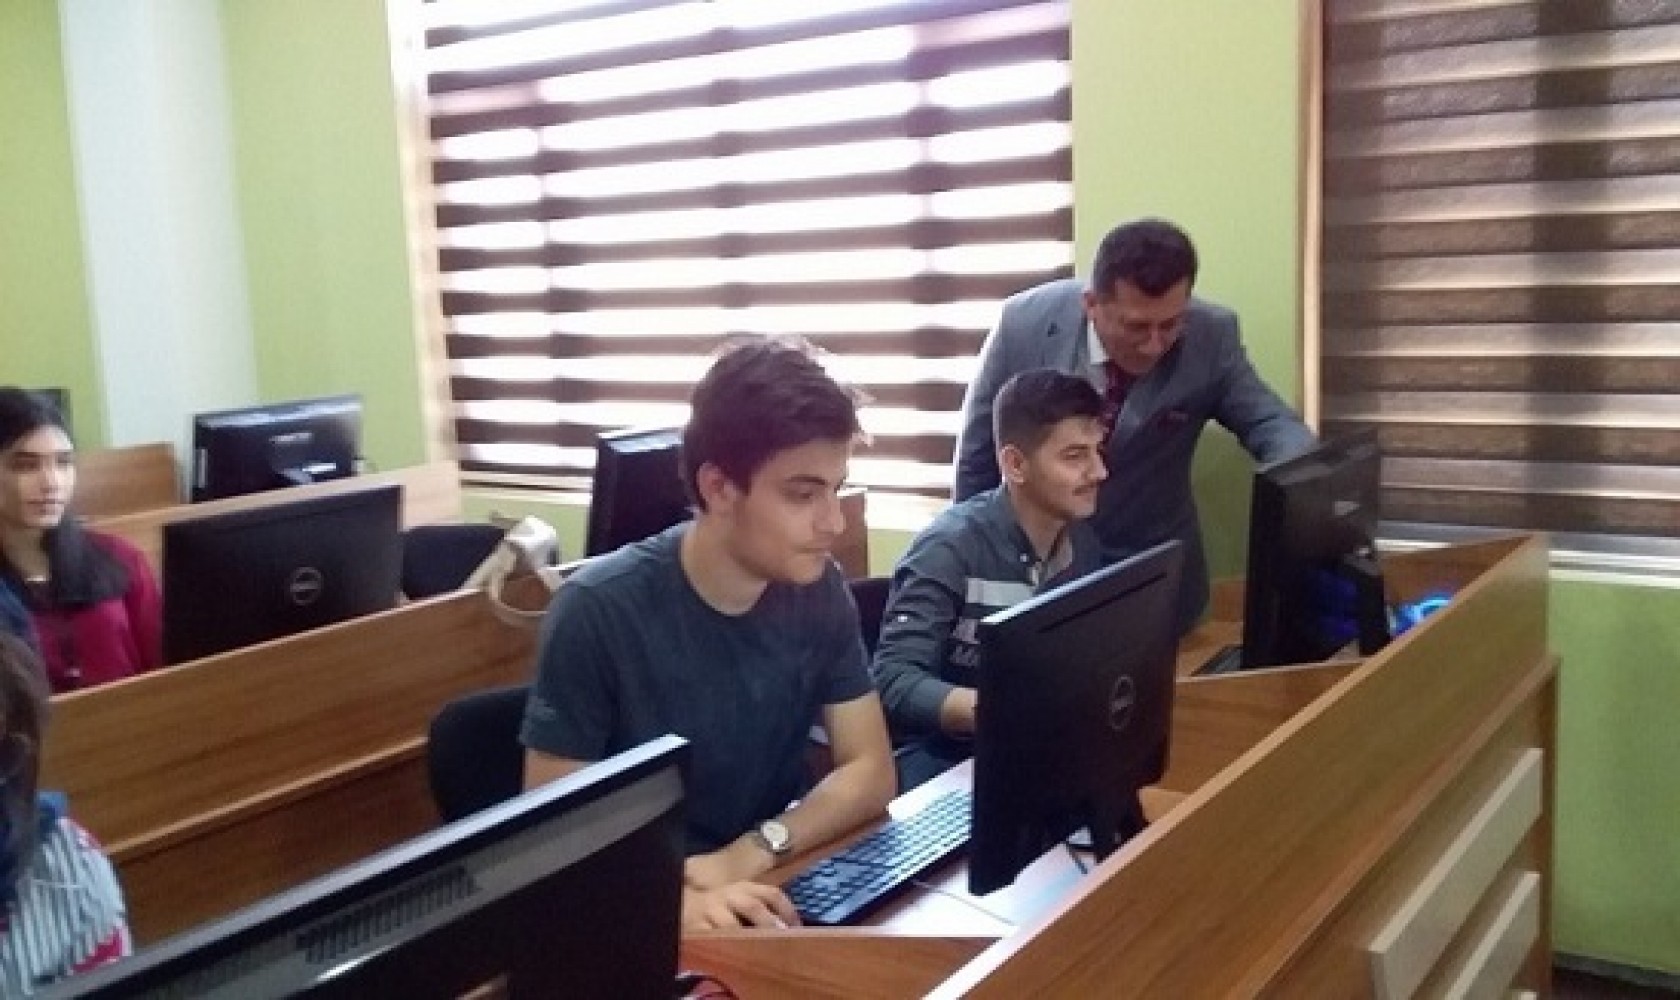 A visit to Statistics and ICT Center at the University of Zakho